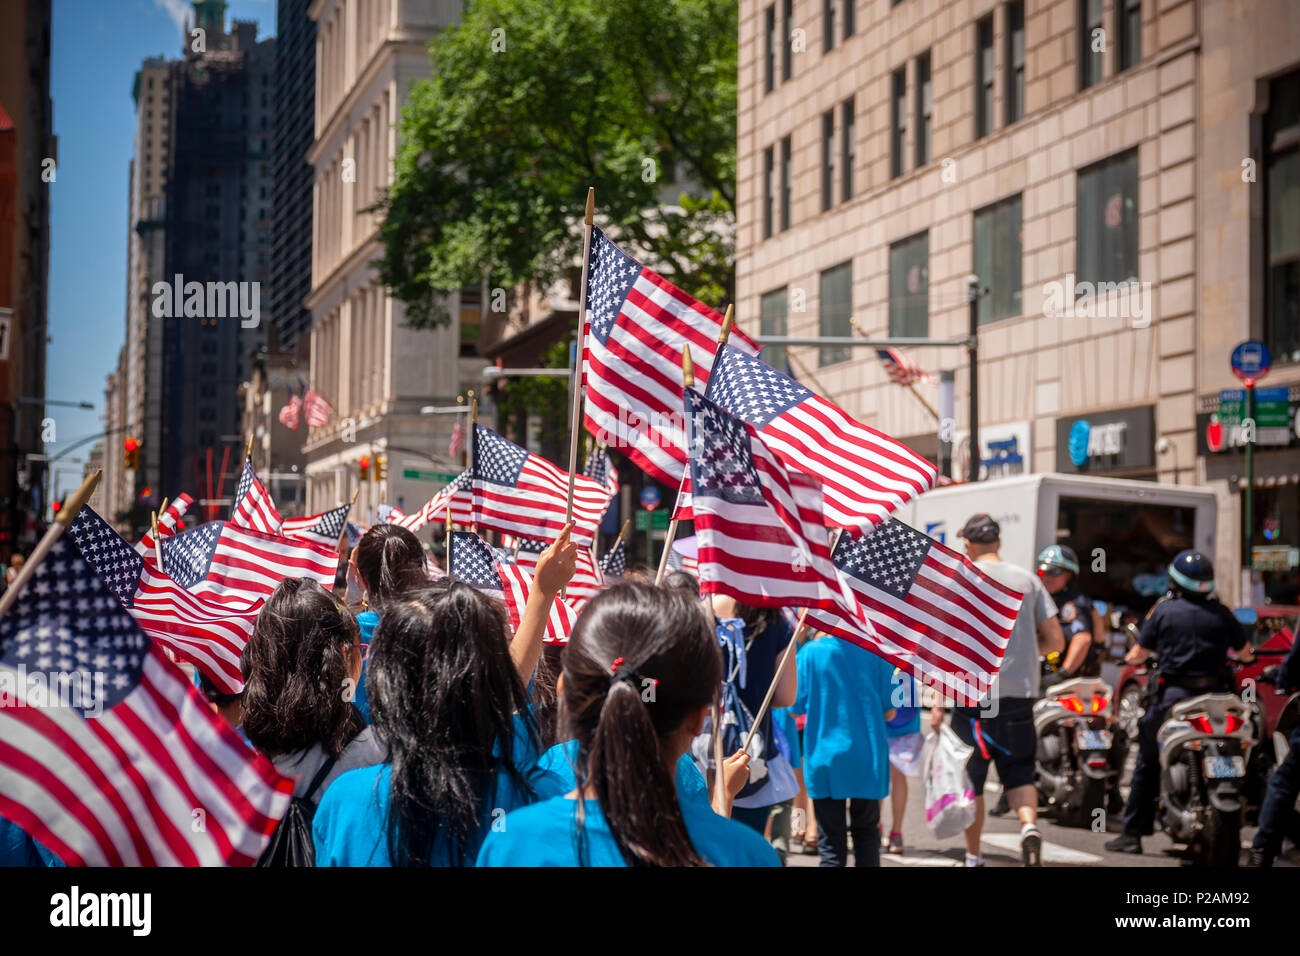 New York, USA. 14th Jun, 2018. Students from PS 2 march in the annual Flag Day Parade in New York on Thursday, June 14, 2018, starting at New York City Hall Park.  Flag Day was created by proclamation by President Woodrow Wilson on June 14, 1916 as a holiday honoring America's flag but it was not until 1949 when it became National Flag Day.  The holiday honors the 1777 Flag Resolution where the stars and stripes were officially adopted as the flag of the United States. (© Richard B. Levine) Credit: Richard Levine/Alamy Live News Stock Photo